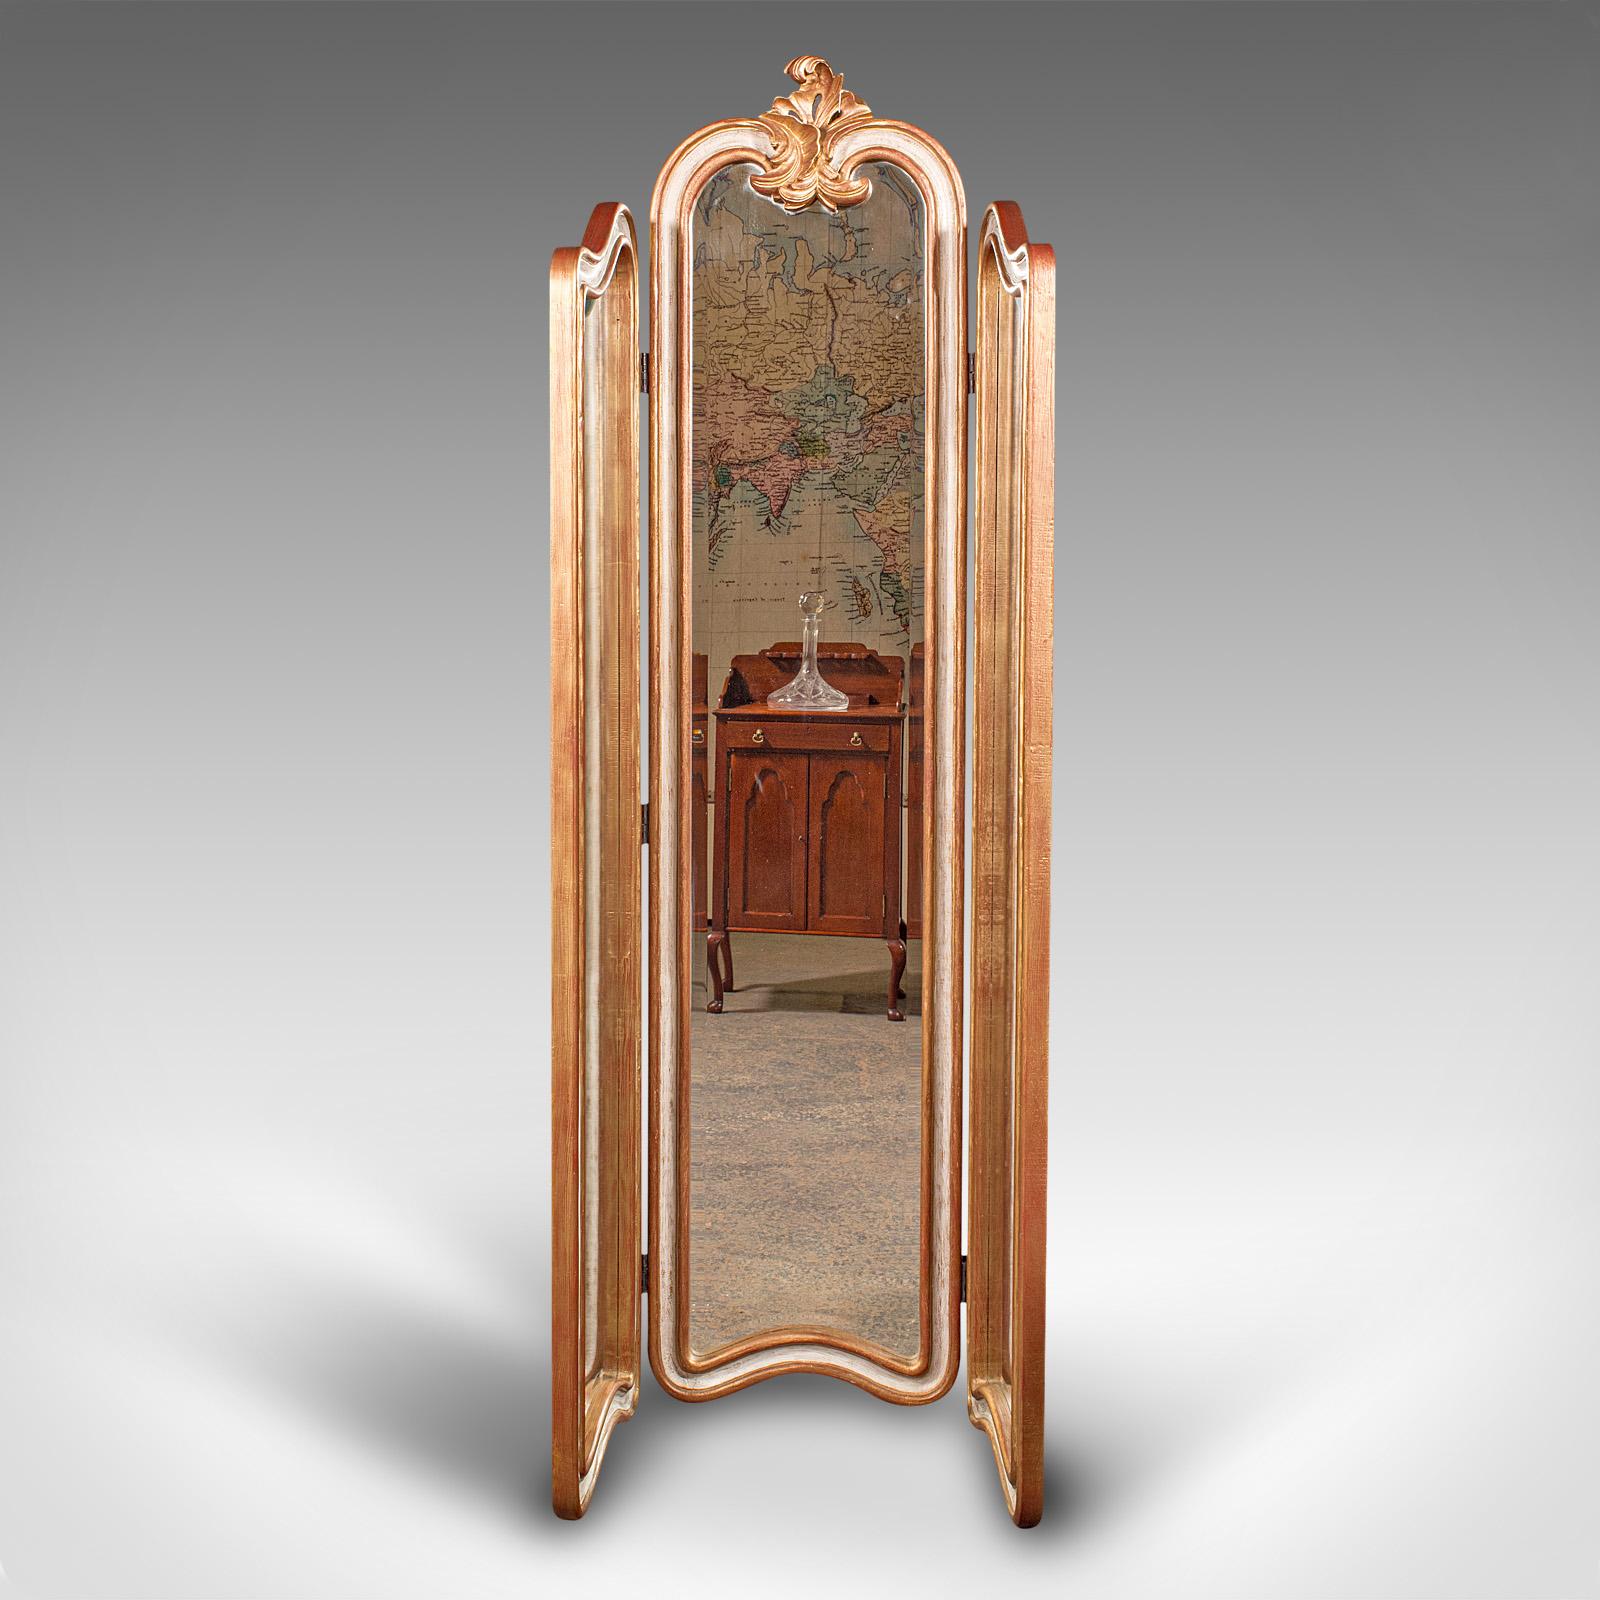 Unknown Vintage Dressing Mirror, Continental, Gilt, 3 Panel Room Divider, Privacy Screen